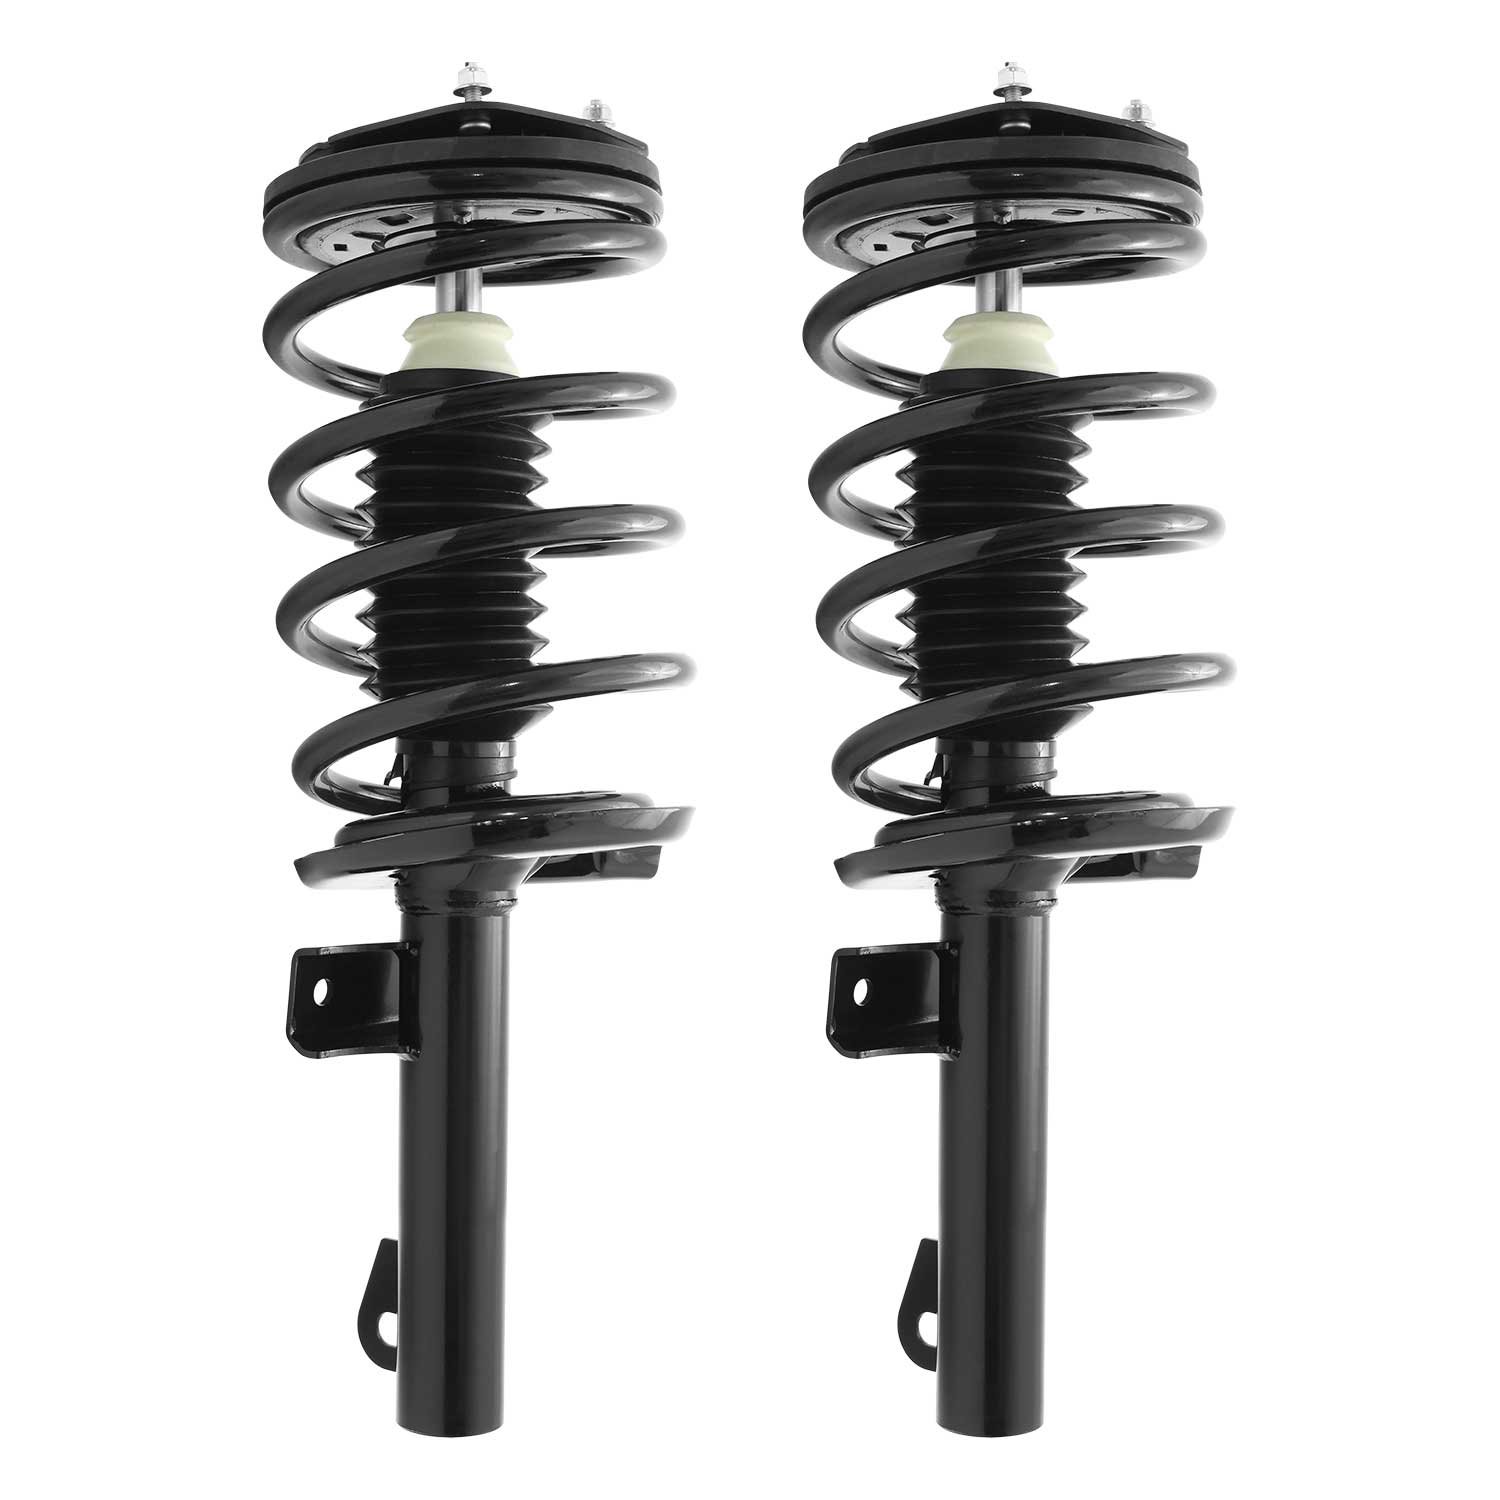 2-13010-001 Suspension Strut & Coil Spring Assembly Set Fits Select Ford Freestar, Mercury Monterey